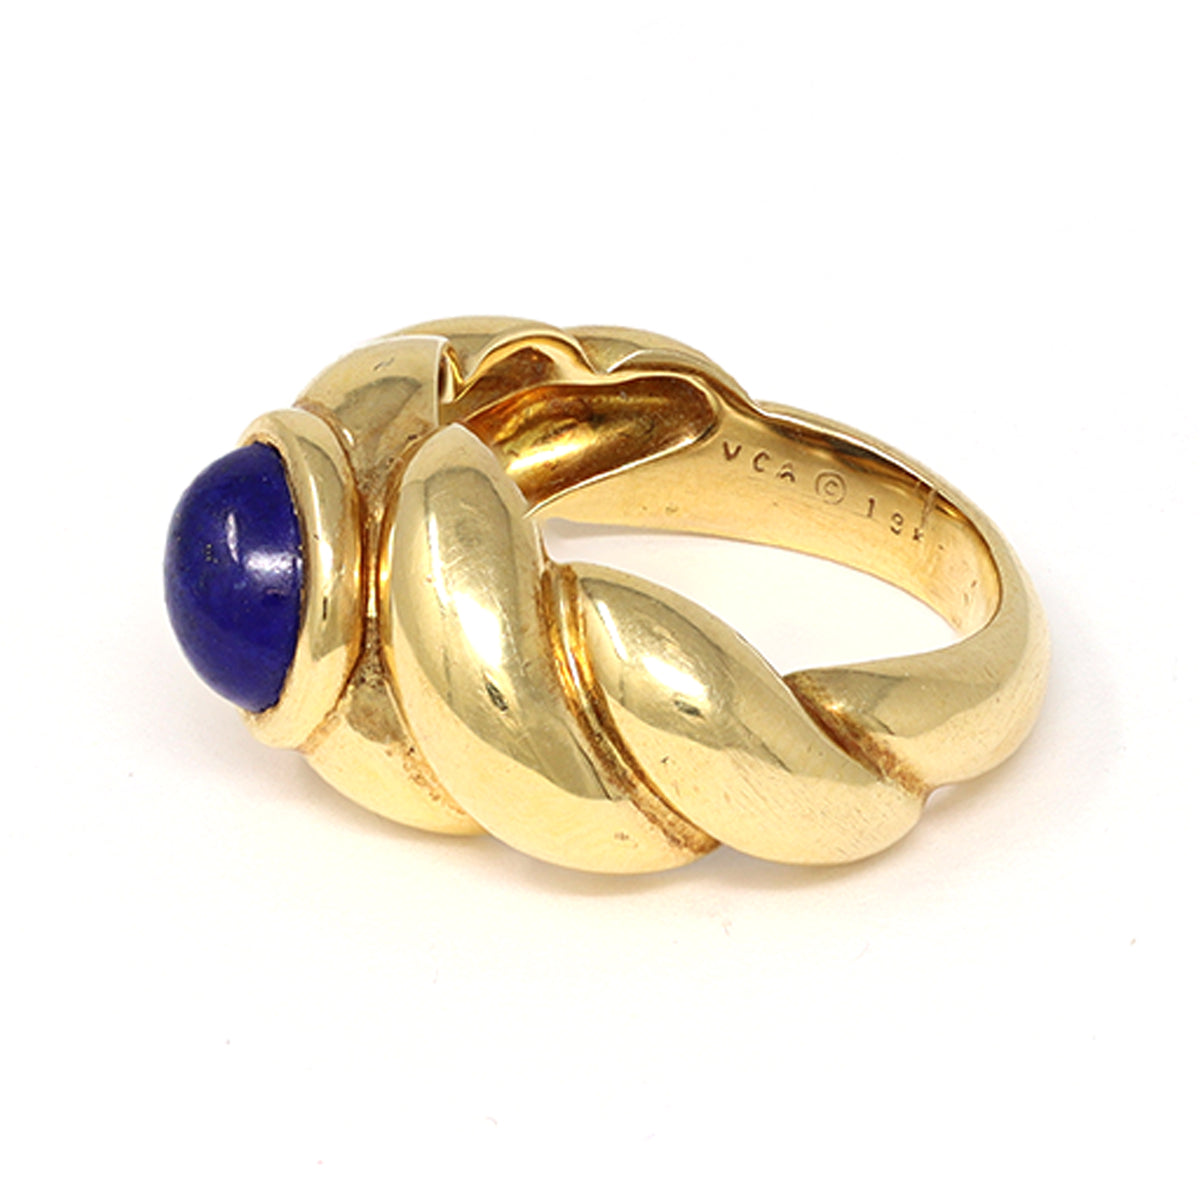 Van Cleef &amp; Arpels Lapis Lazuli Cabochon Ring Set in 18k Yellow Gold makers mark view